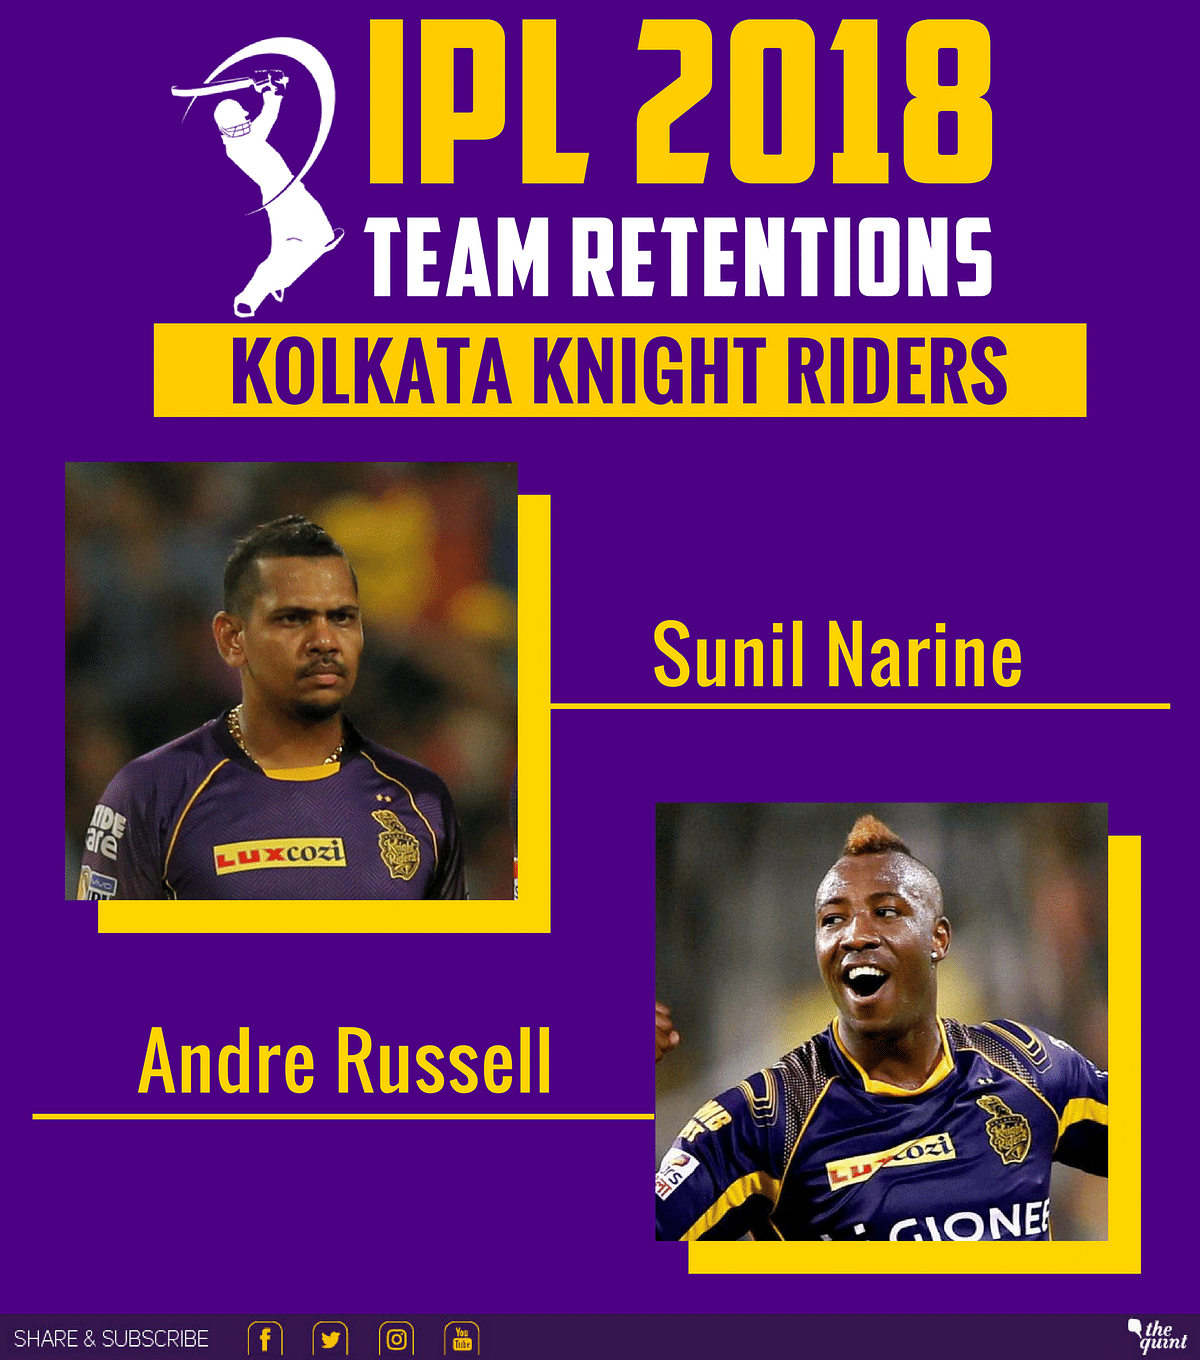 Take a look at the players retained by Chennai Super Kings and Rajasthan Royals.